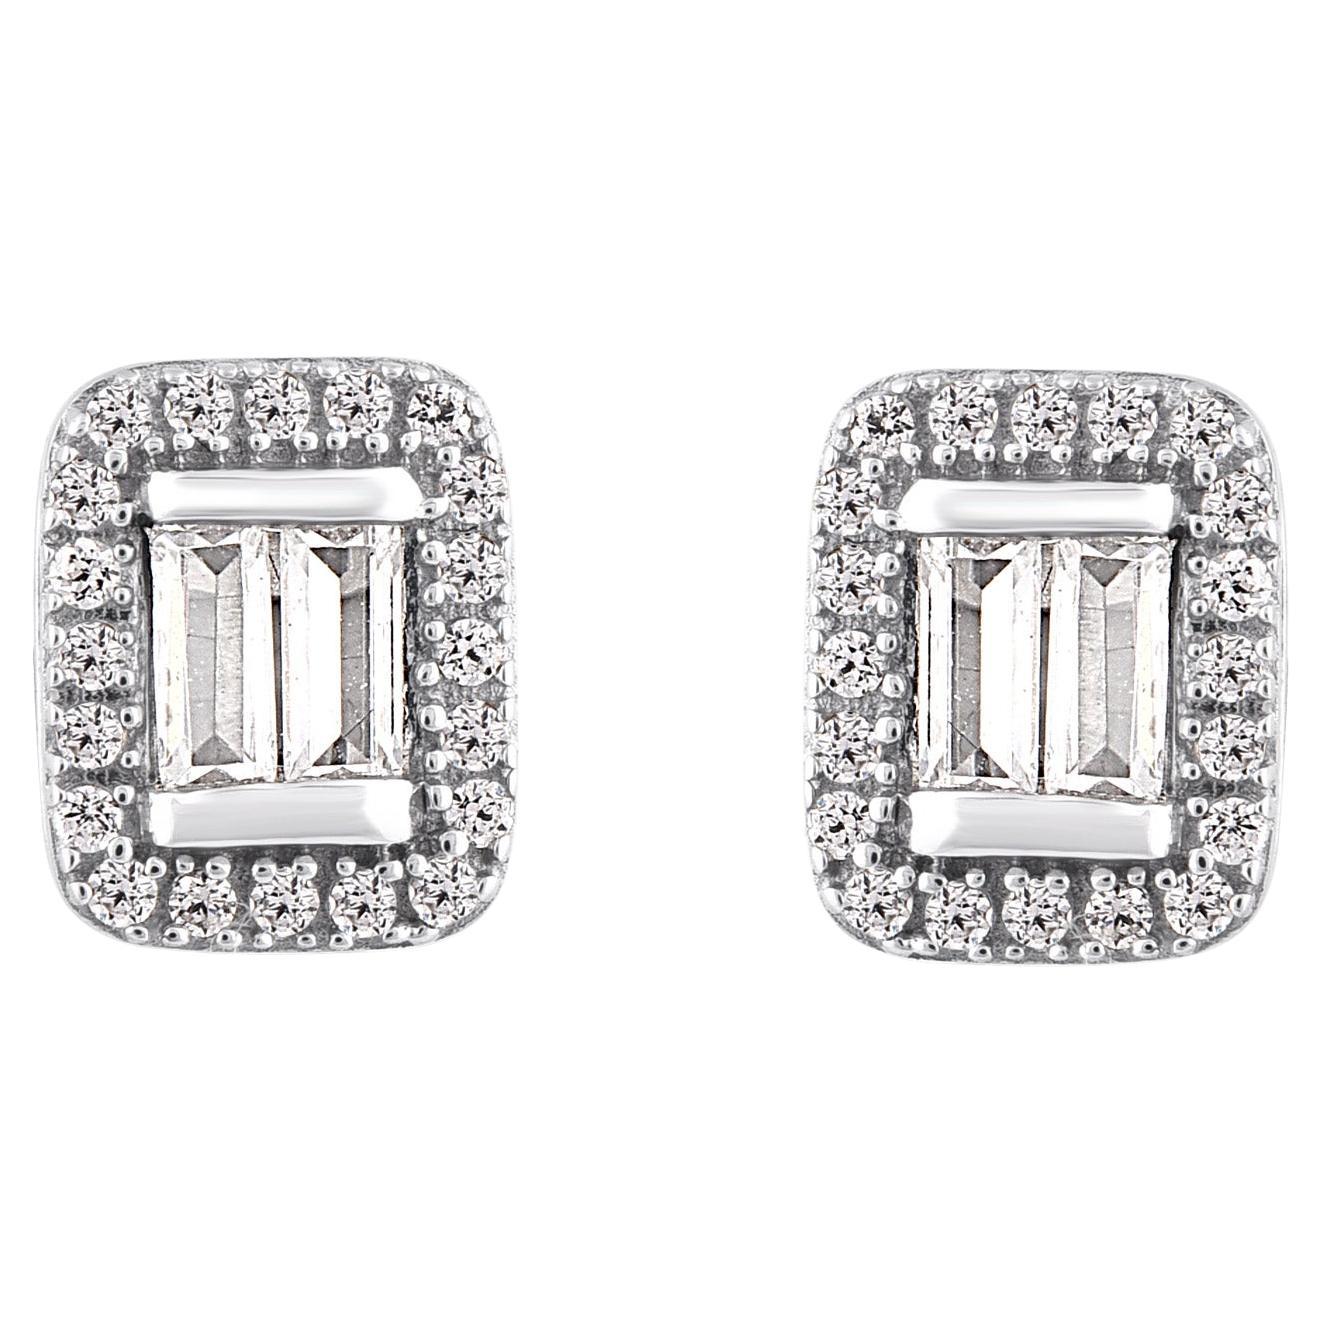 TJD 0.33 Carat Baguette and Round Diamond 14KT White Gold Halo Stud earrings For Sale